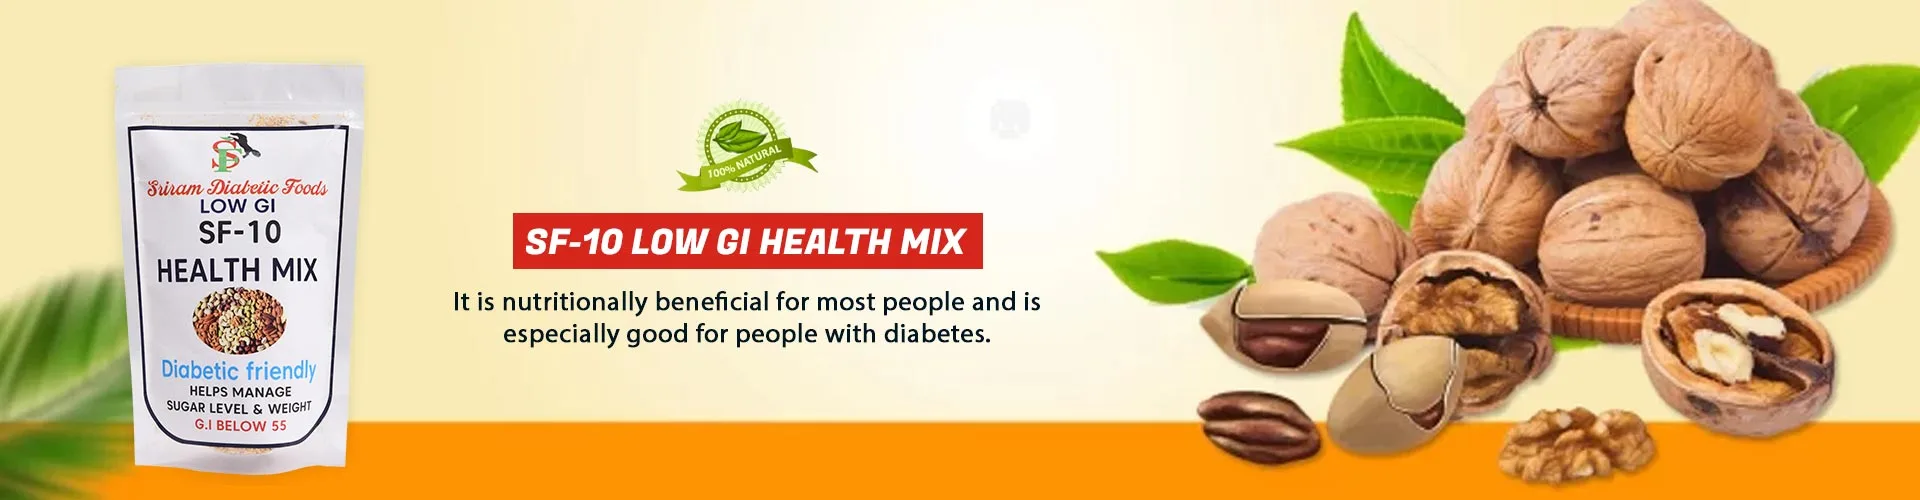 Health Mix Manufacturers in Indianapolis